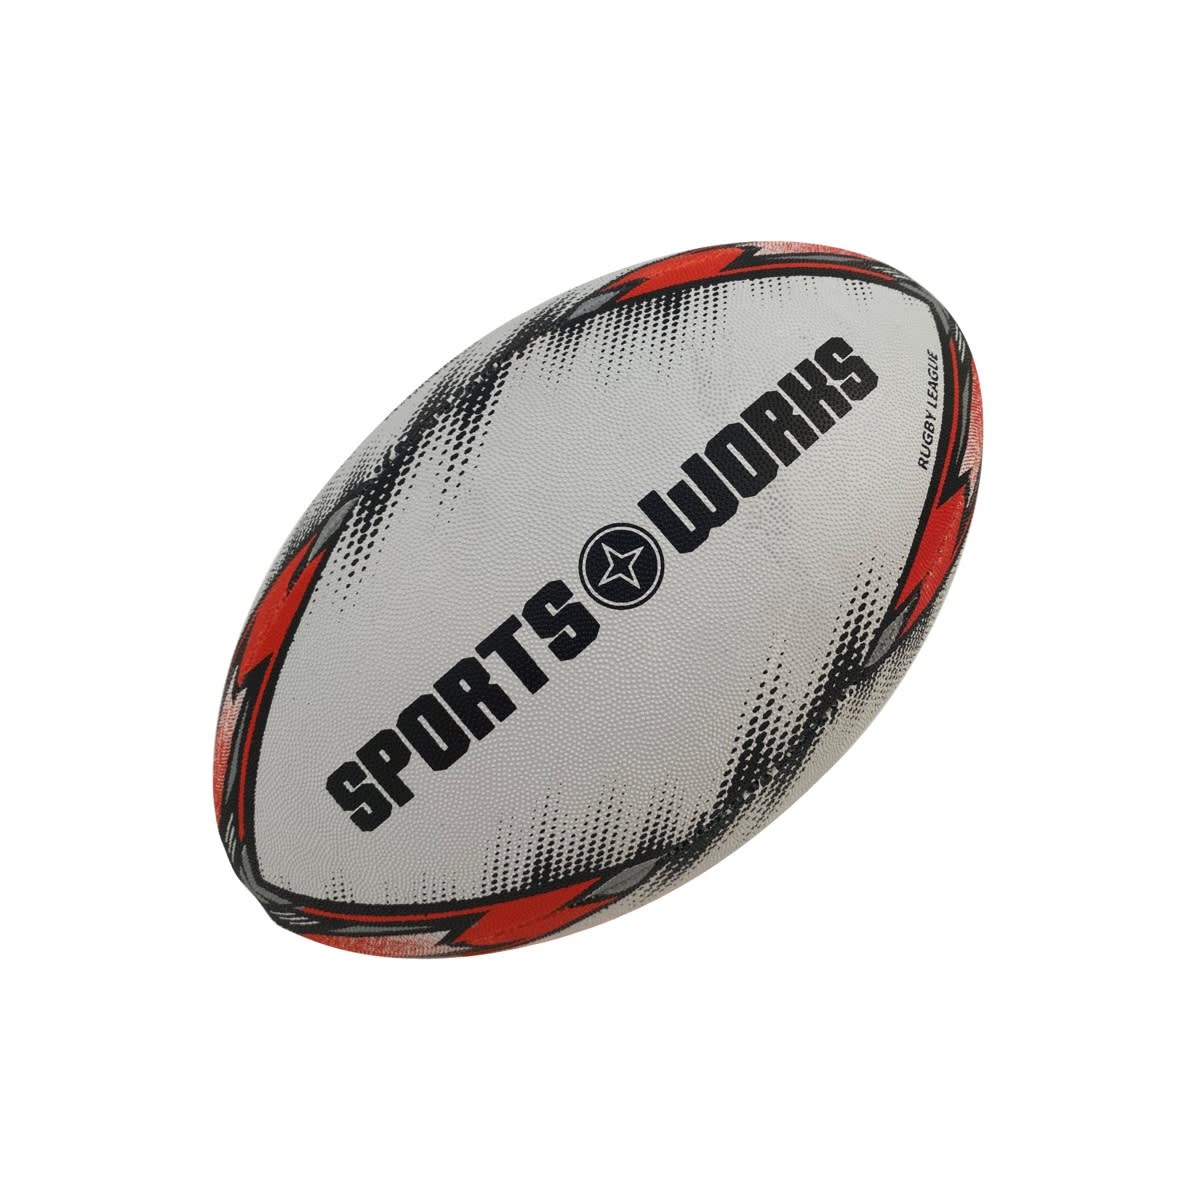 4" Kids Soft Mini Lightweight Indoor Football Available in Black Red & Union 